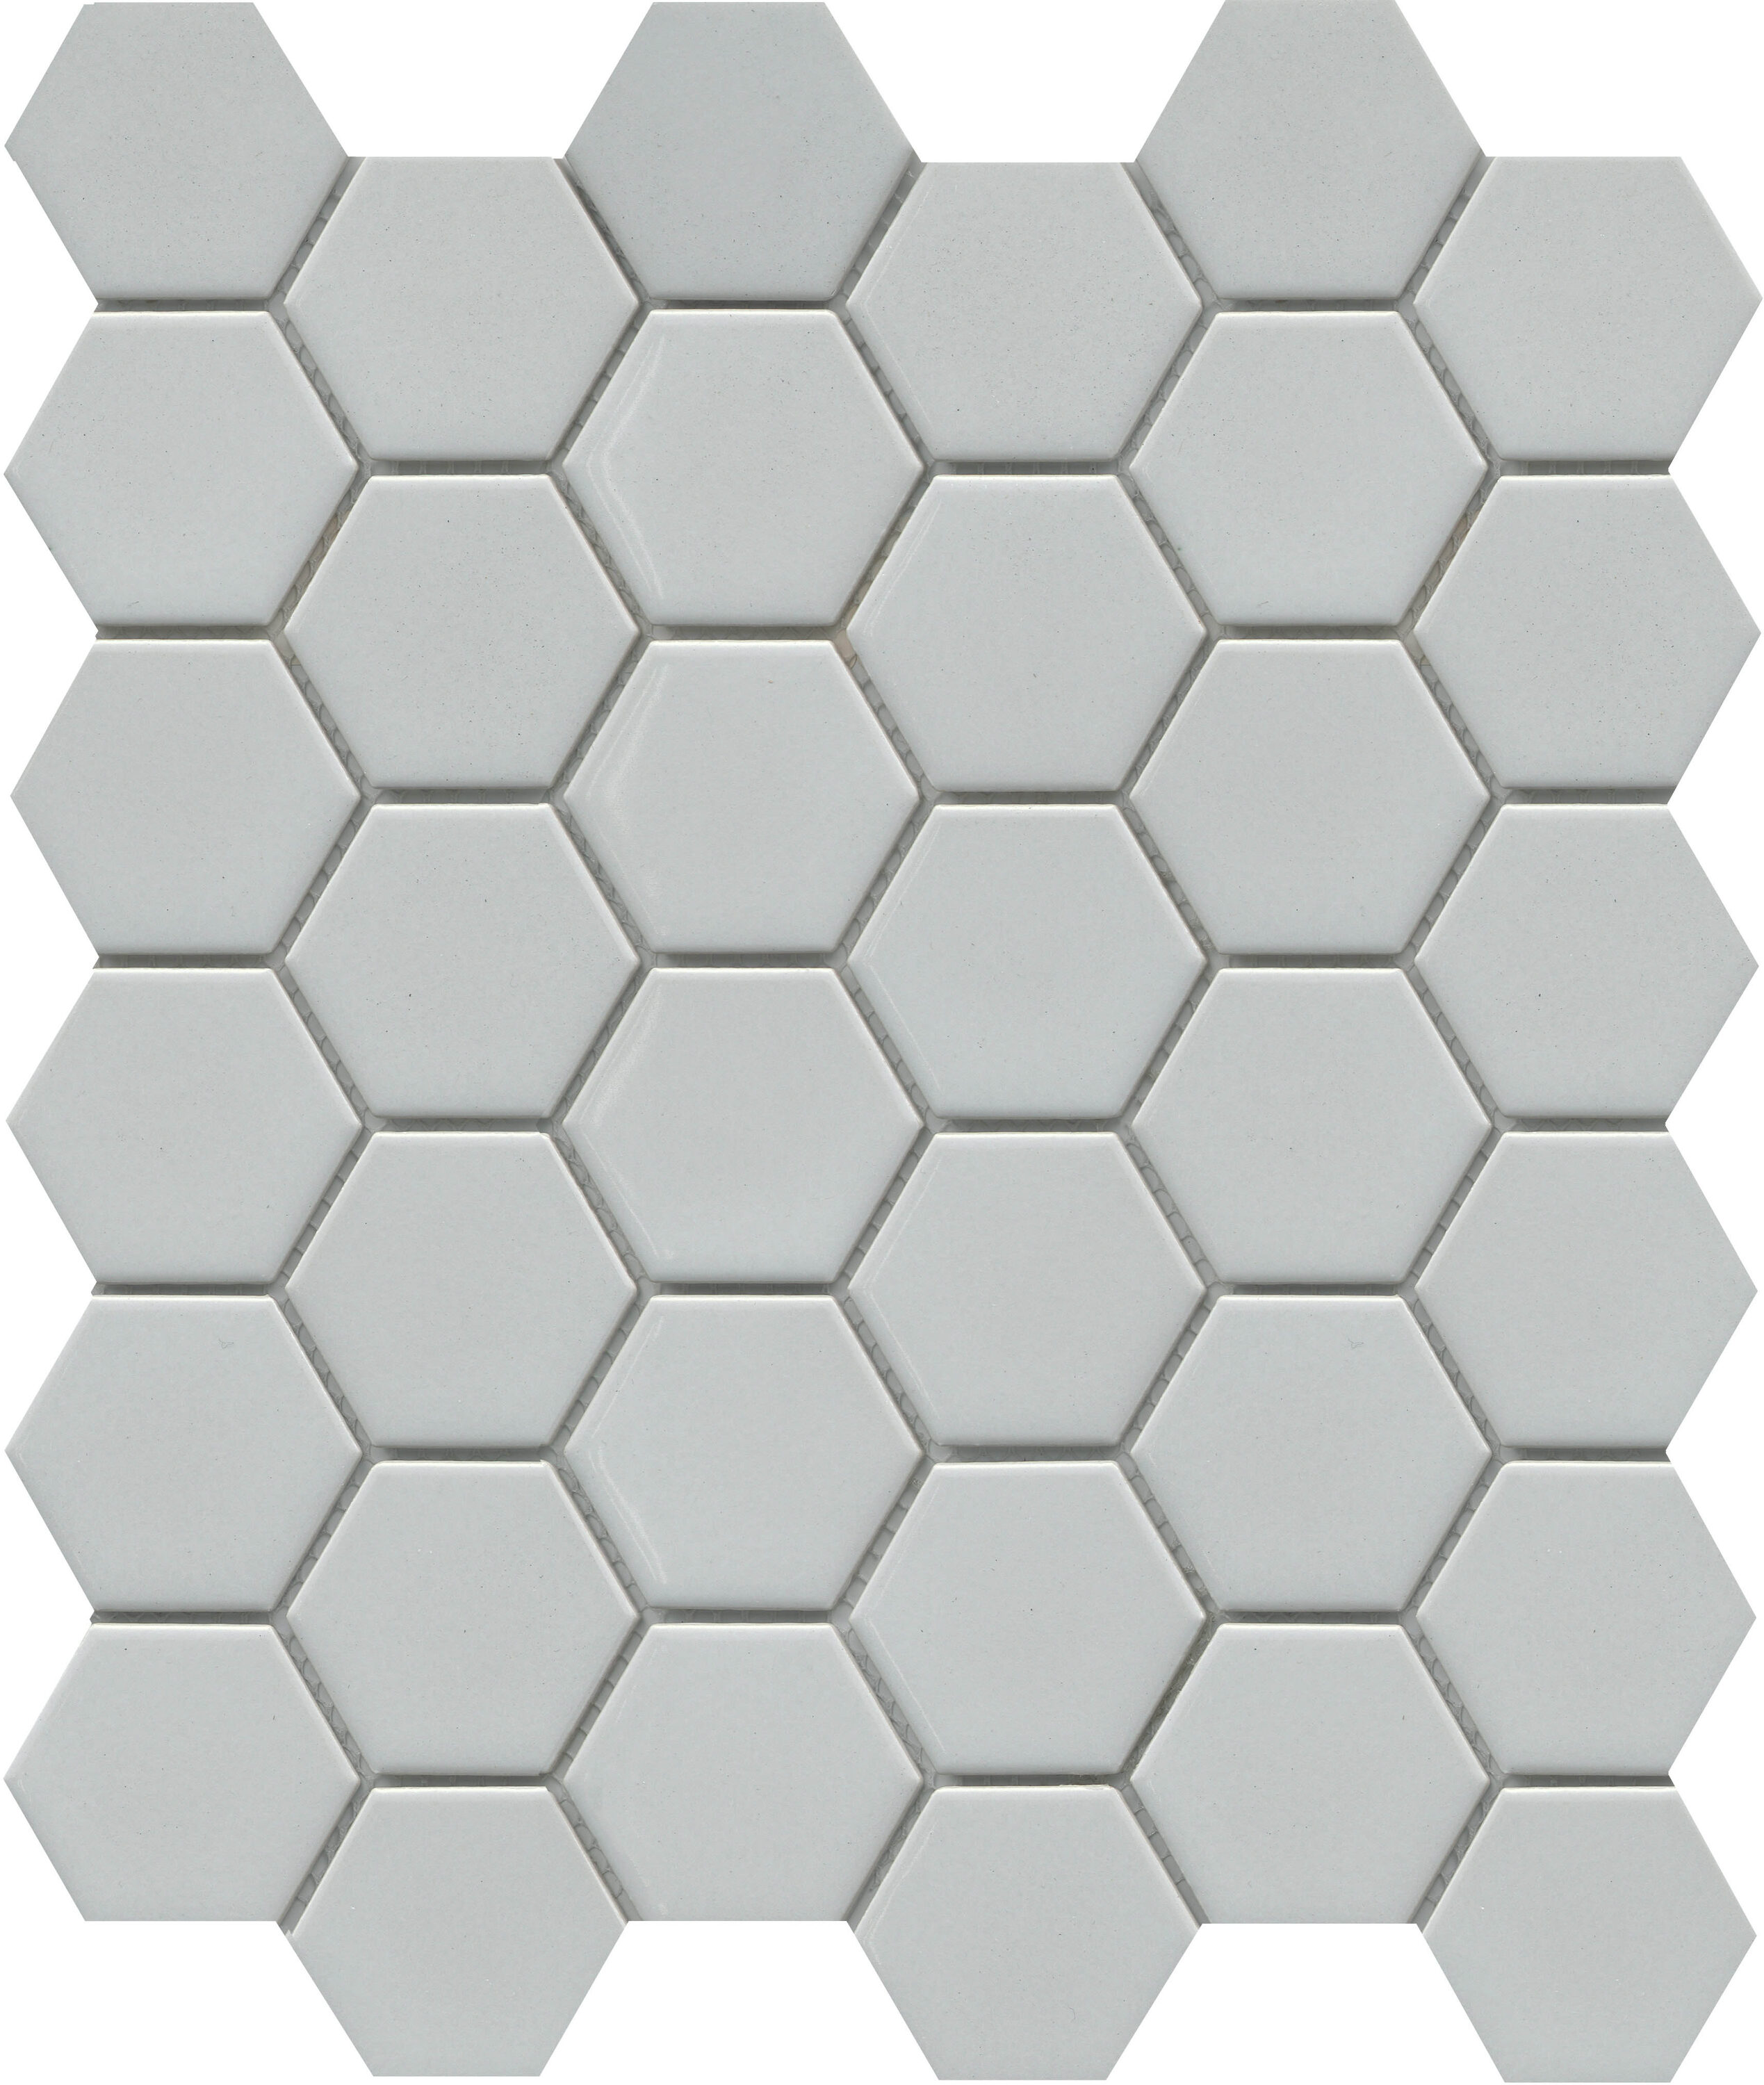 Emser Influence Gray 11-in x 13-in Glossy Porcelain Hexagon Patterned ...